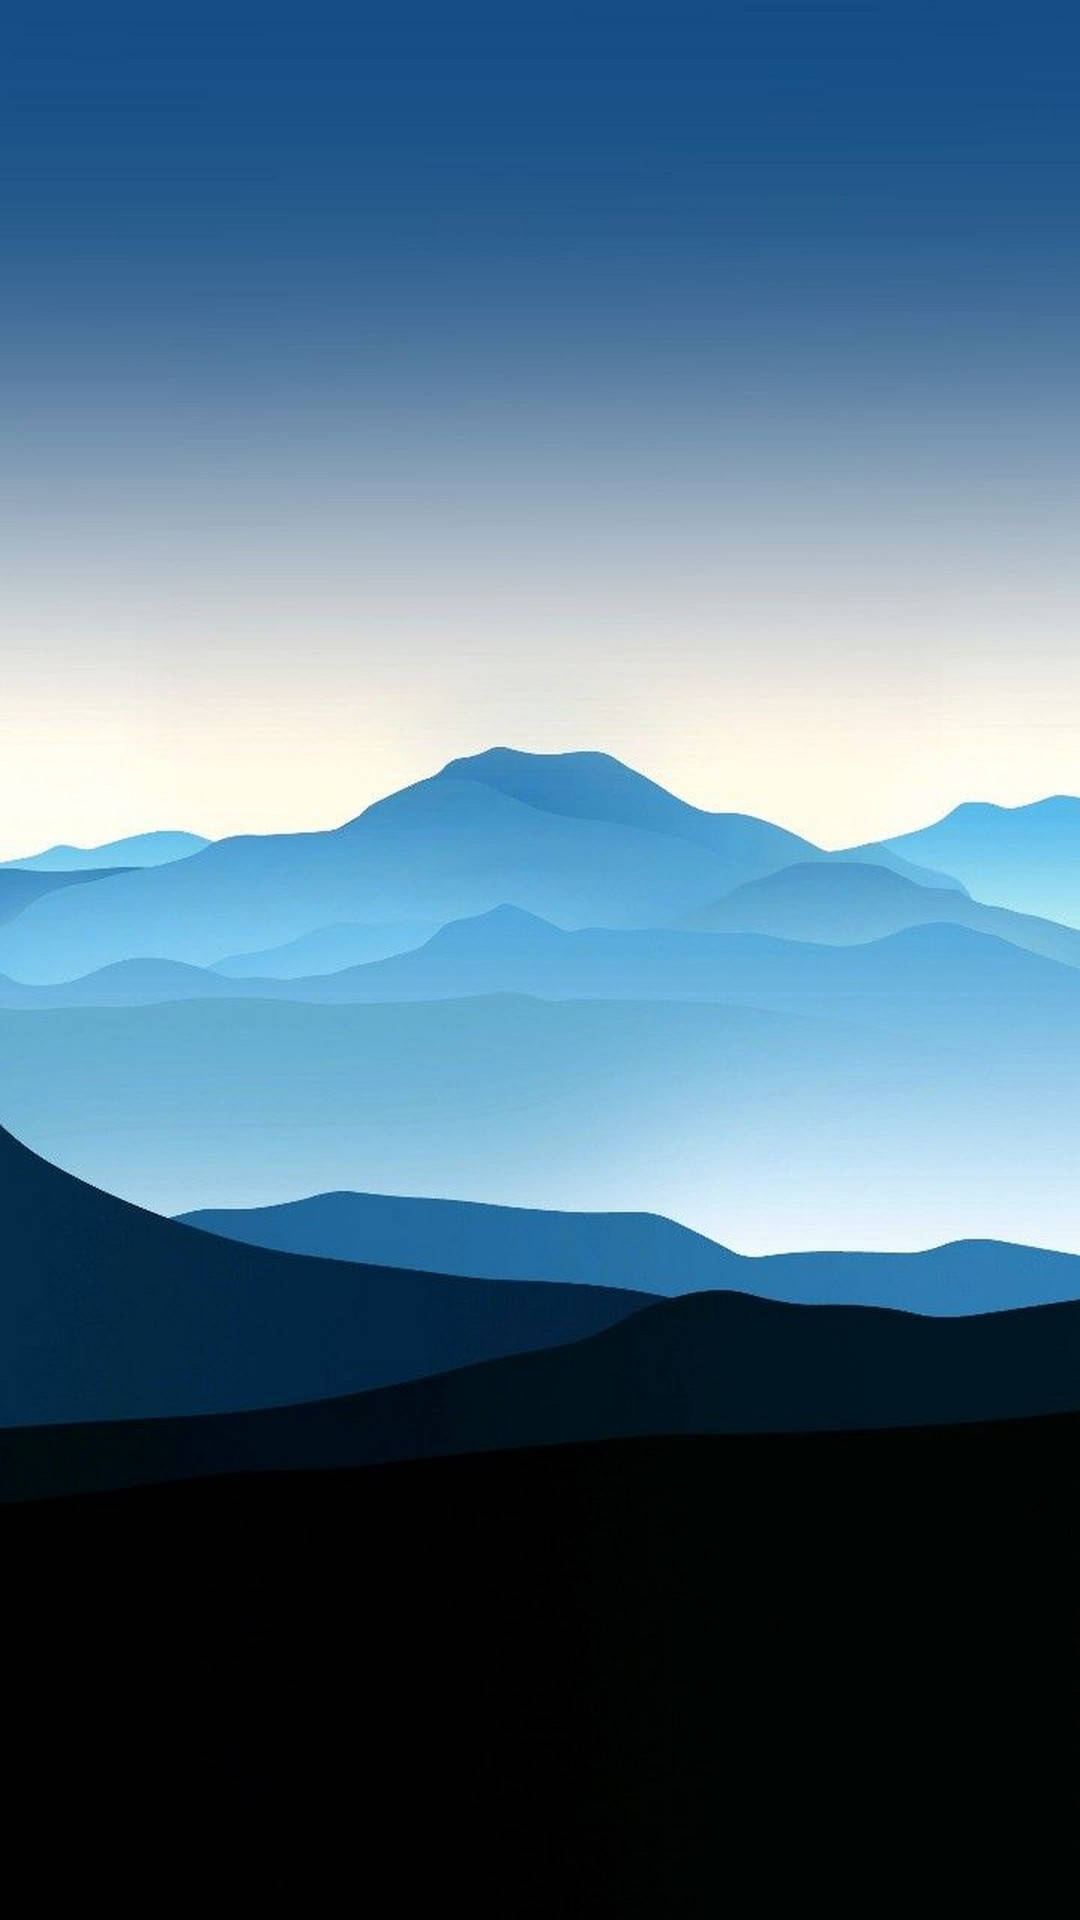 Dark Blue Mountain Range Cool Android Background